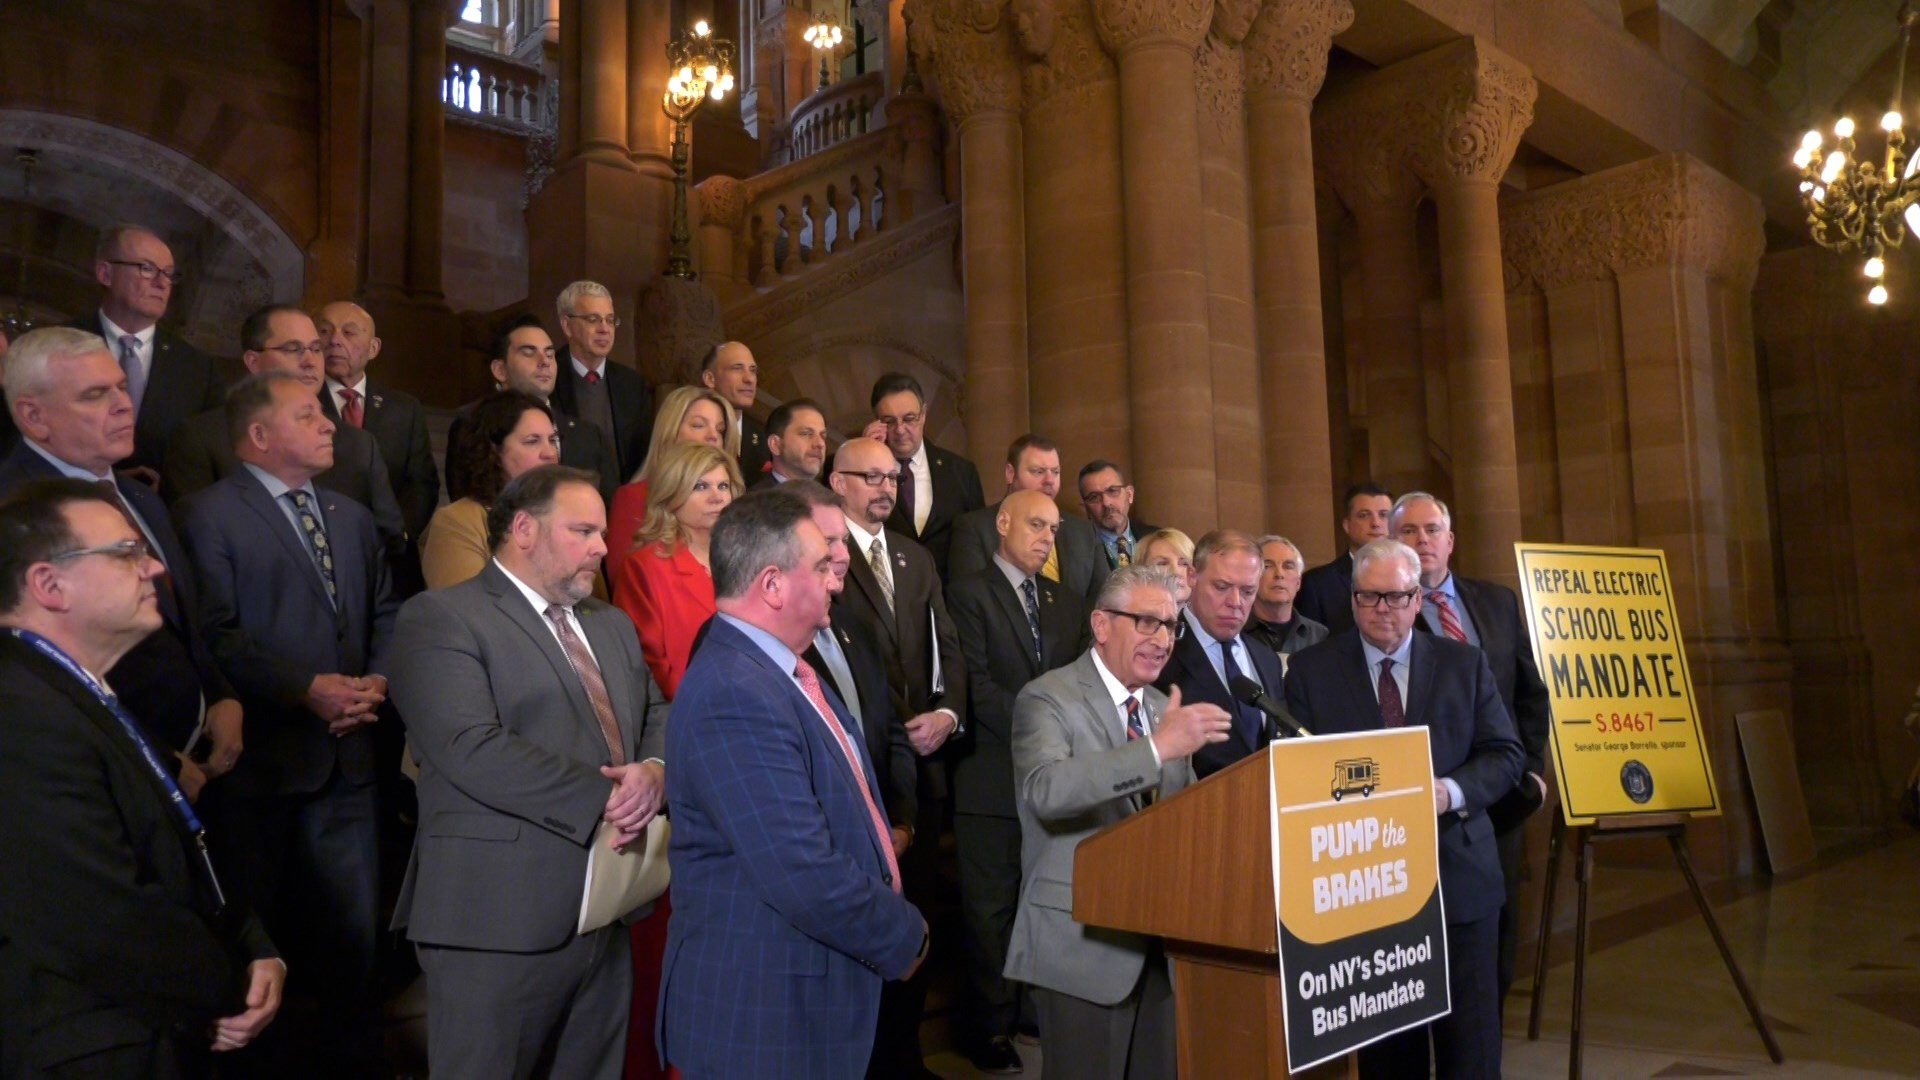 Efforts in Albany to roll back electric school bus mandate